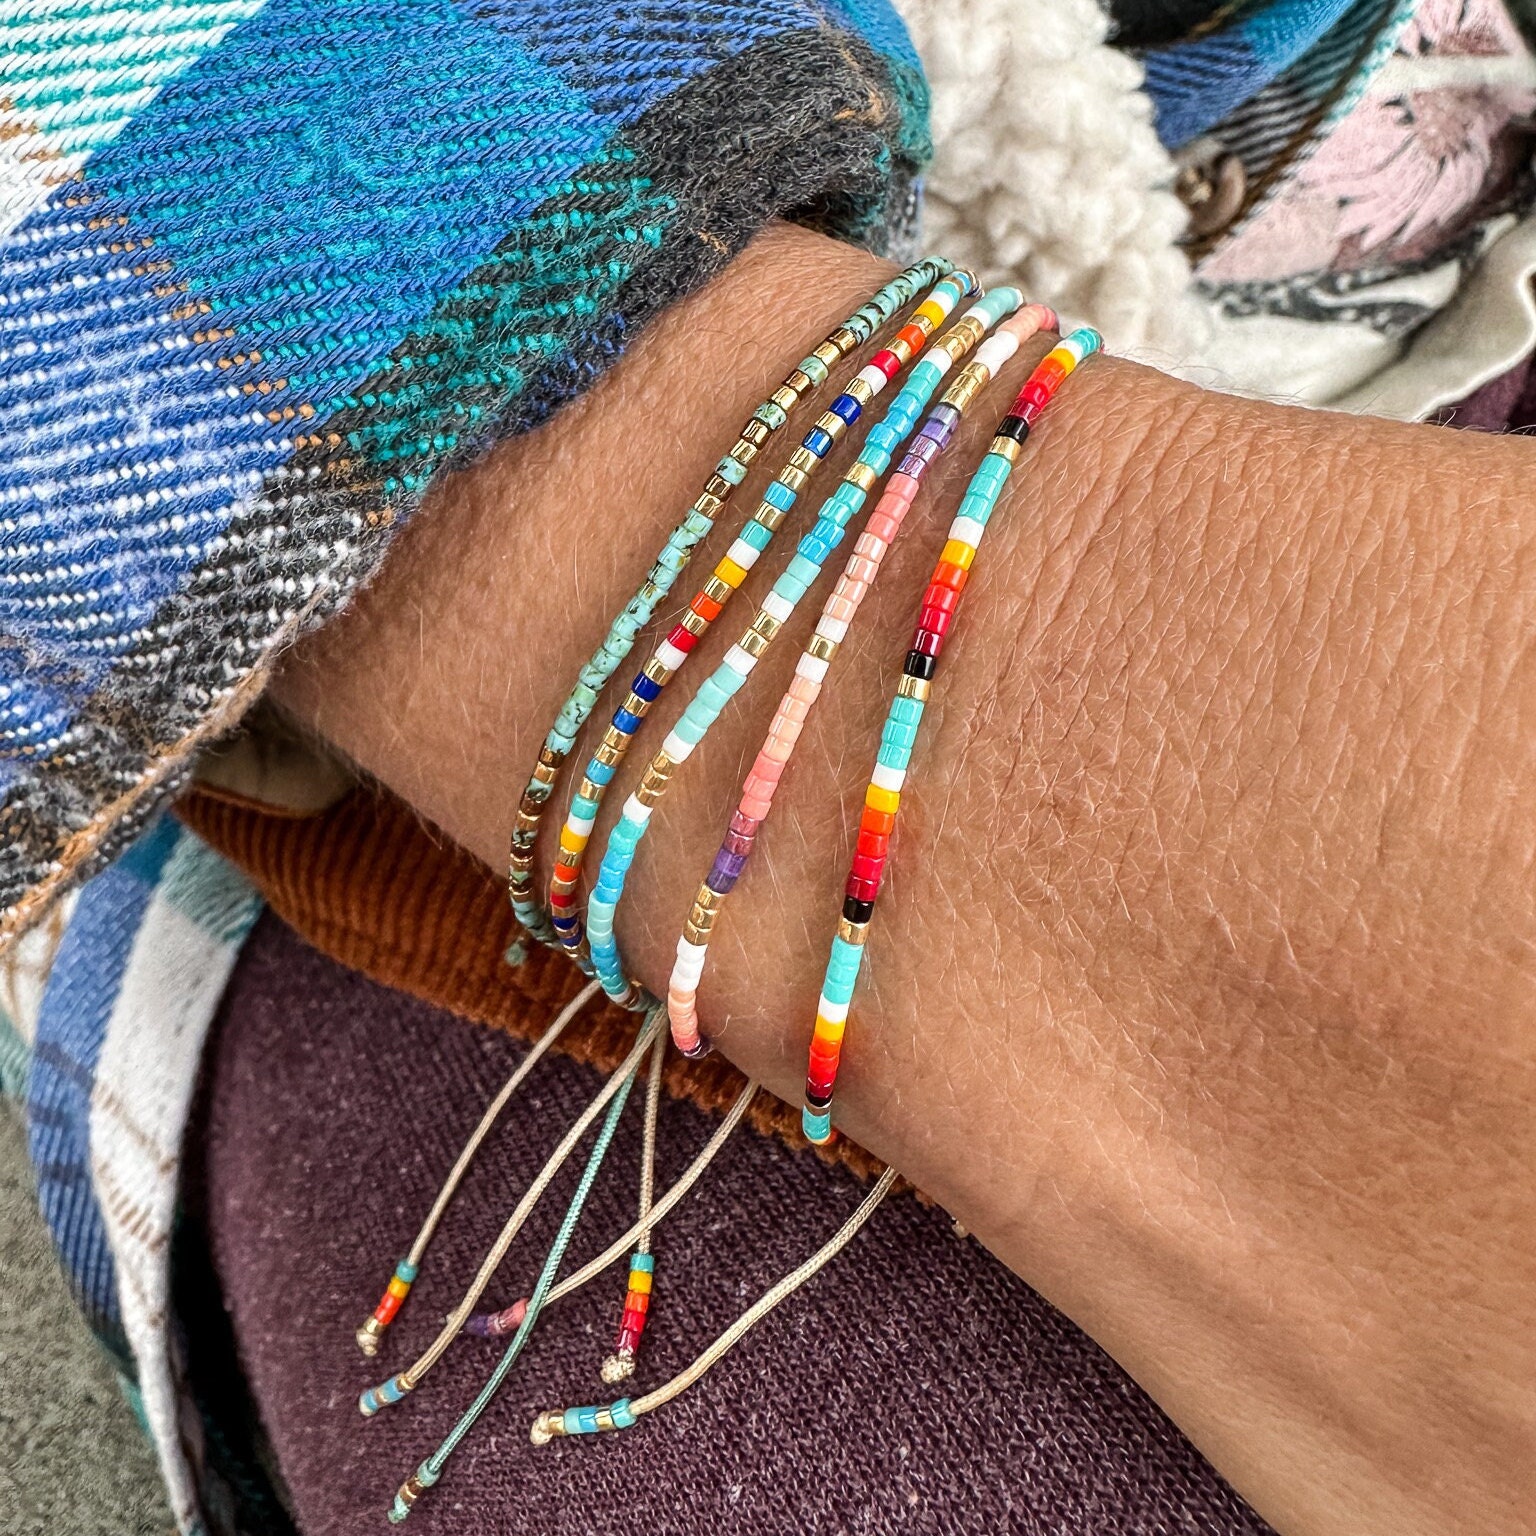 Handmade Bohemian Friendship Bracelet with Colorful Seed Seed Bead Bracelets Charm - Perfect for Women, Children, and Beach Parties